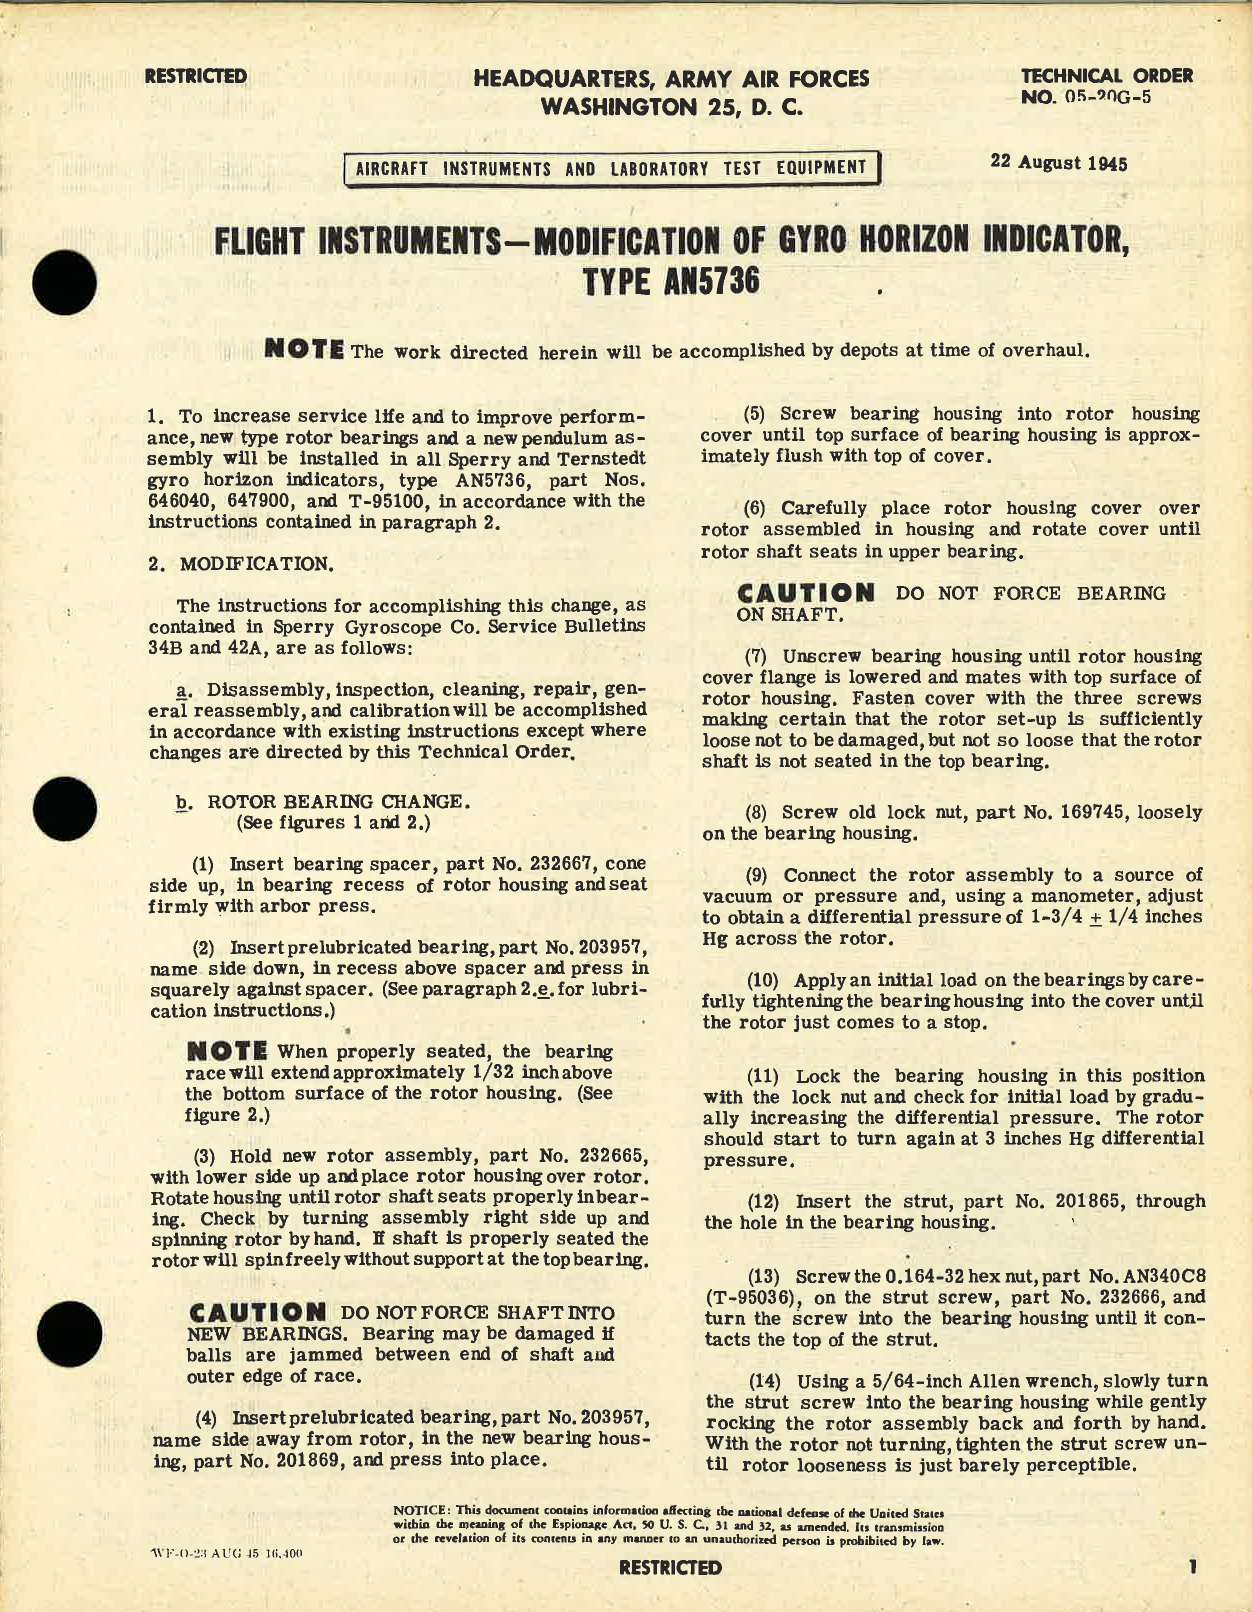 Sample page 1 from AirCorps Library document: Modification of Gyro Horizon Indicator Type AN5736